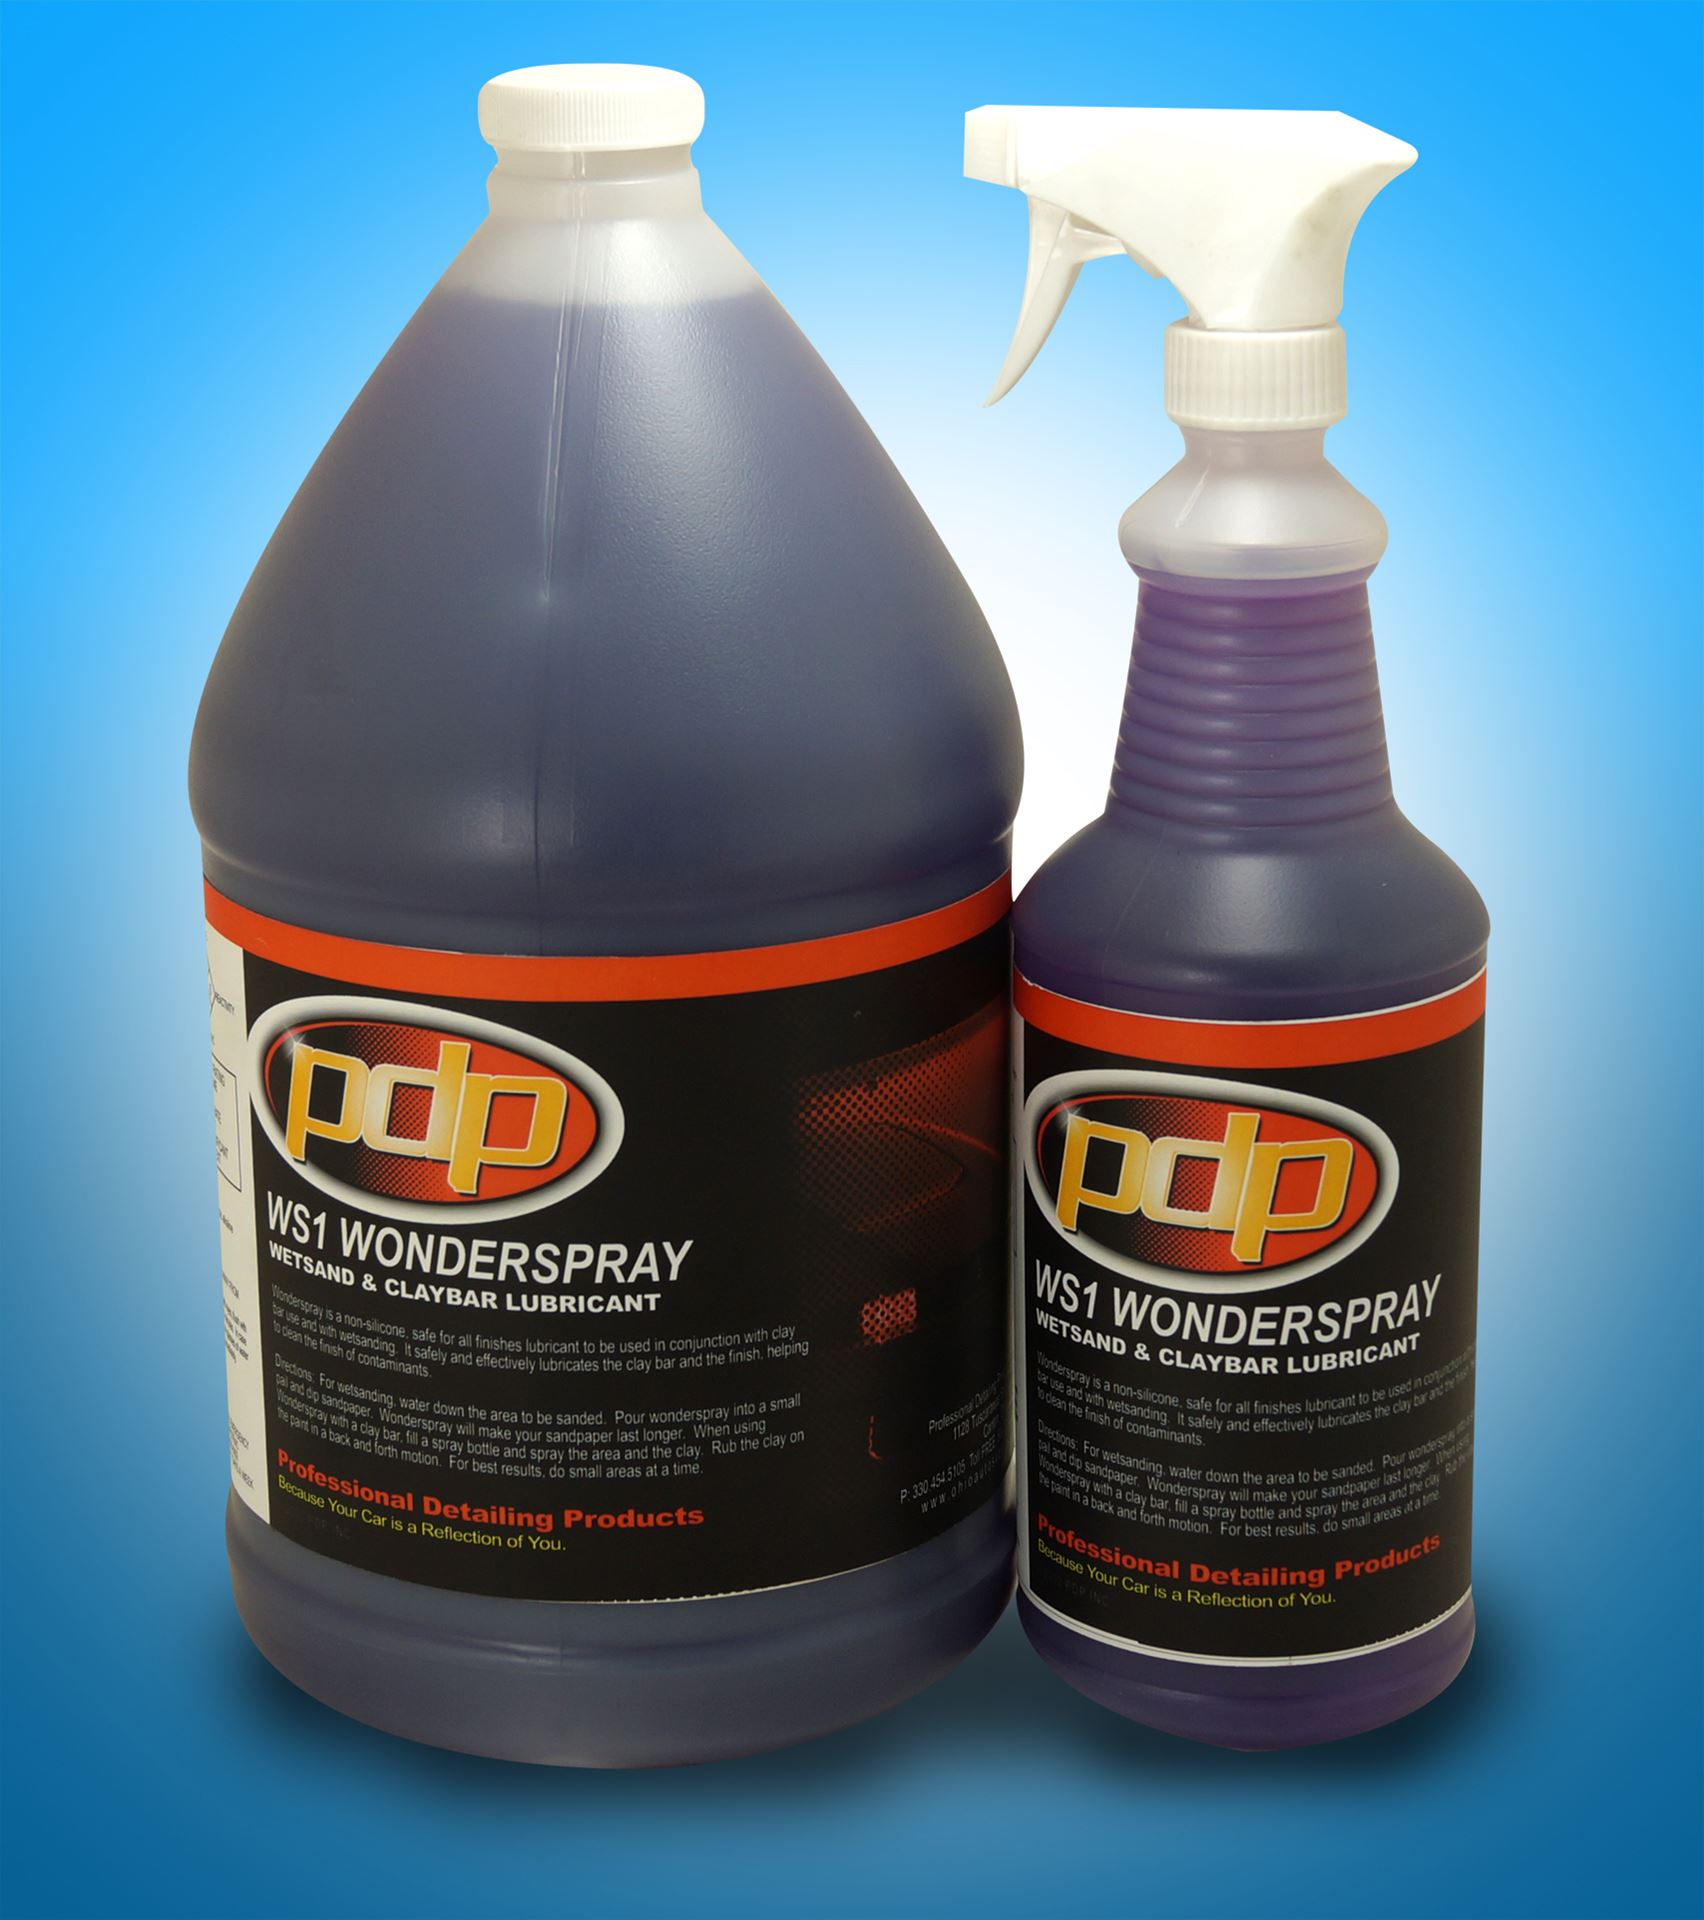 WONDERSPRAY. Professional Detailing Products, Because Your Car is